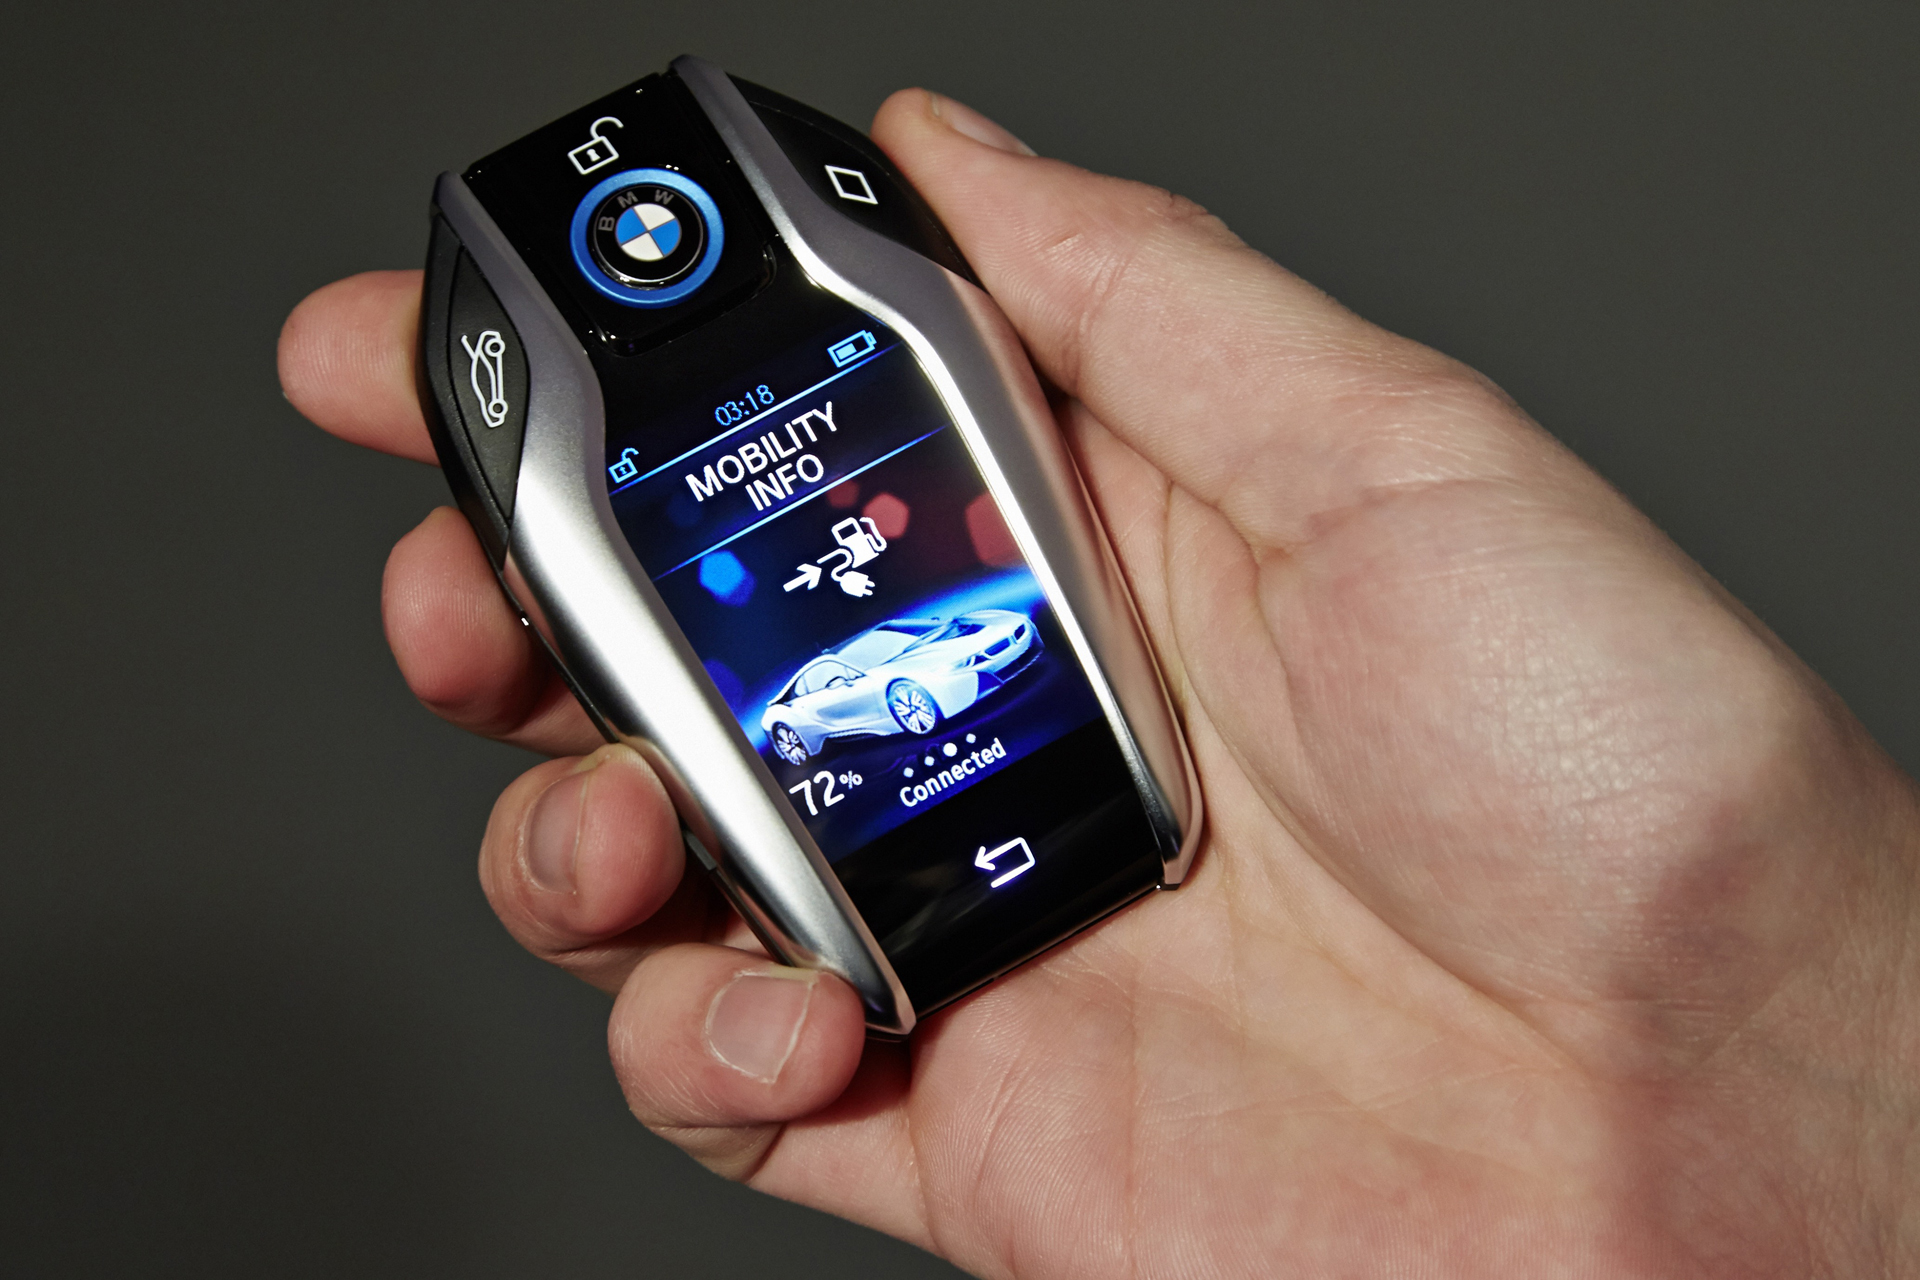 The new BMW Key fob with display